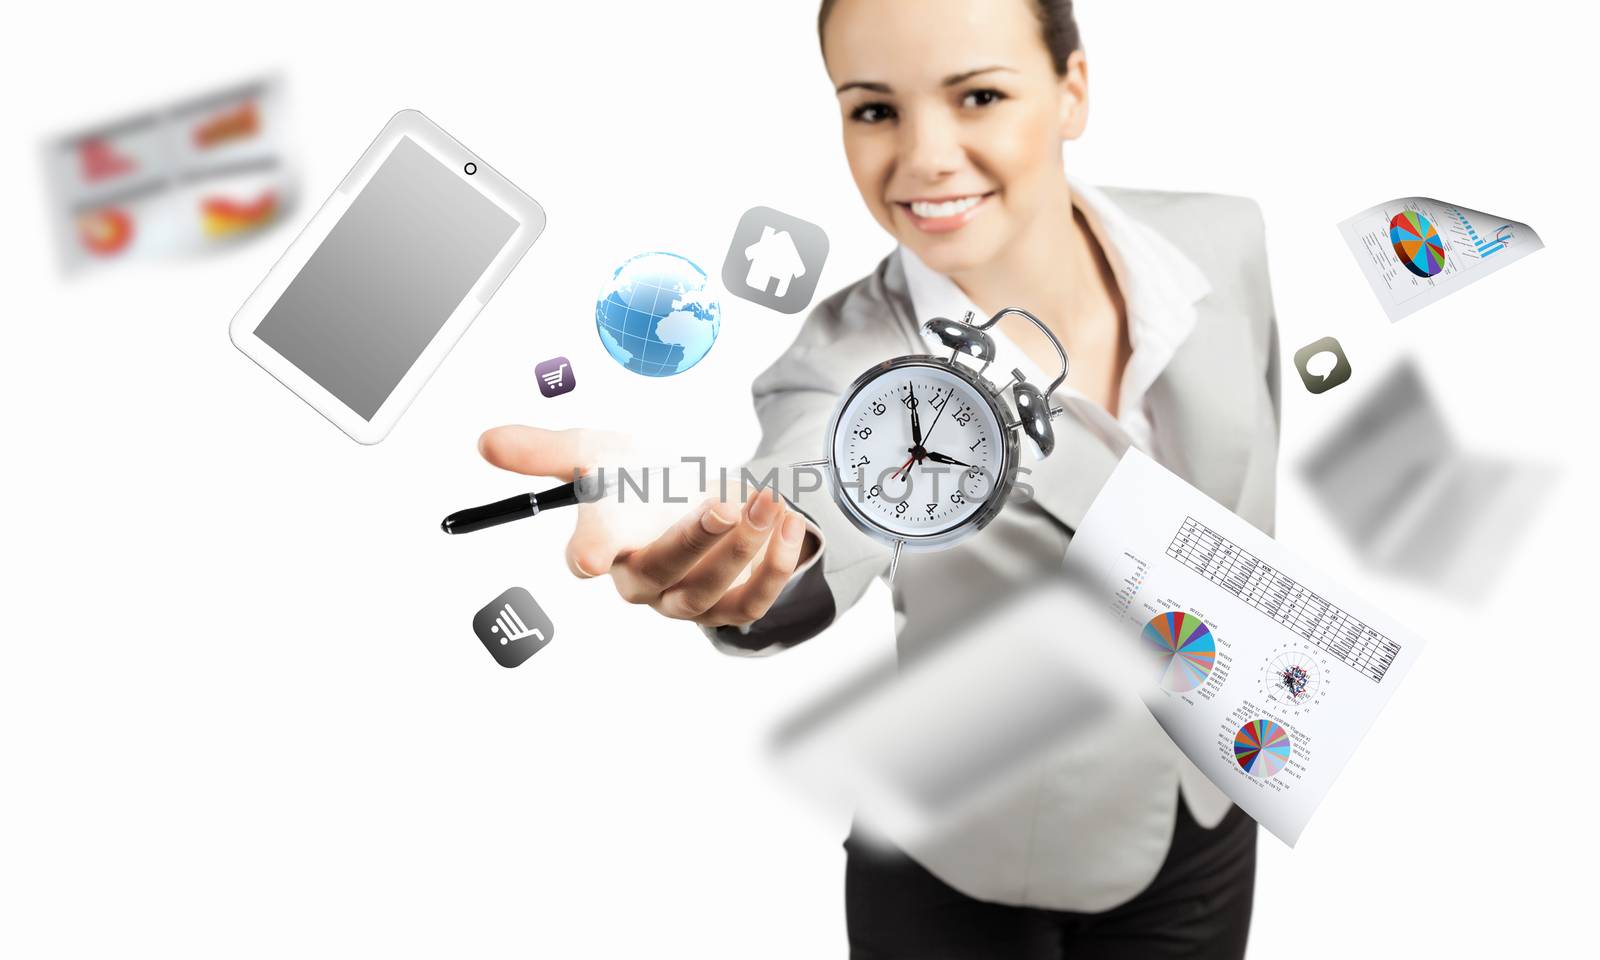 Businesswoman, secretary throwing devices. Office life concept